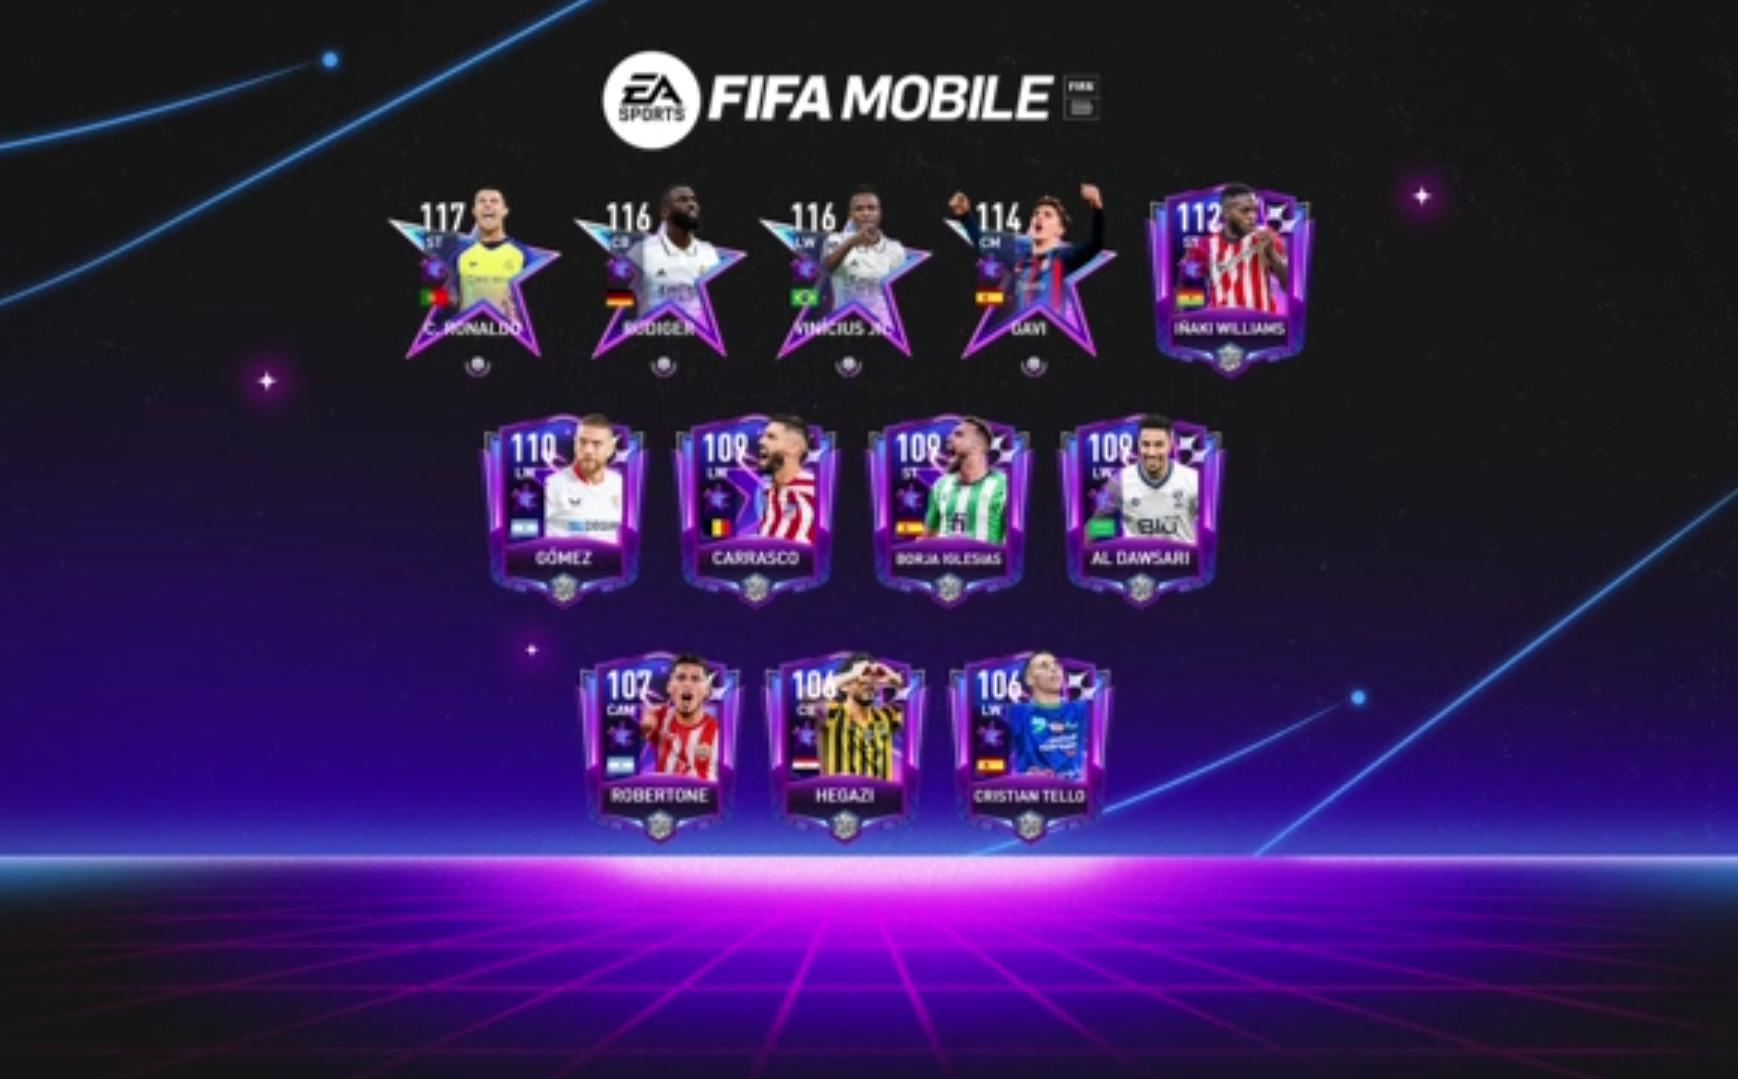 EA SPORTS FC Mobile - Presenting your FIFA World Cup™ Team of the  Tournament! 🏆 🔥 Launching tomorrow in #FIFAMobile.